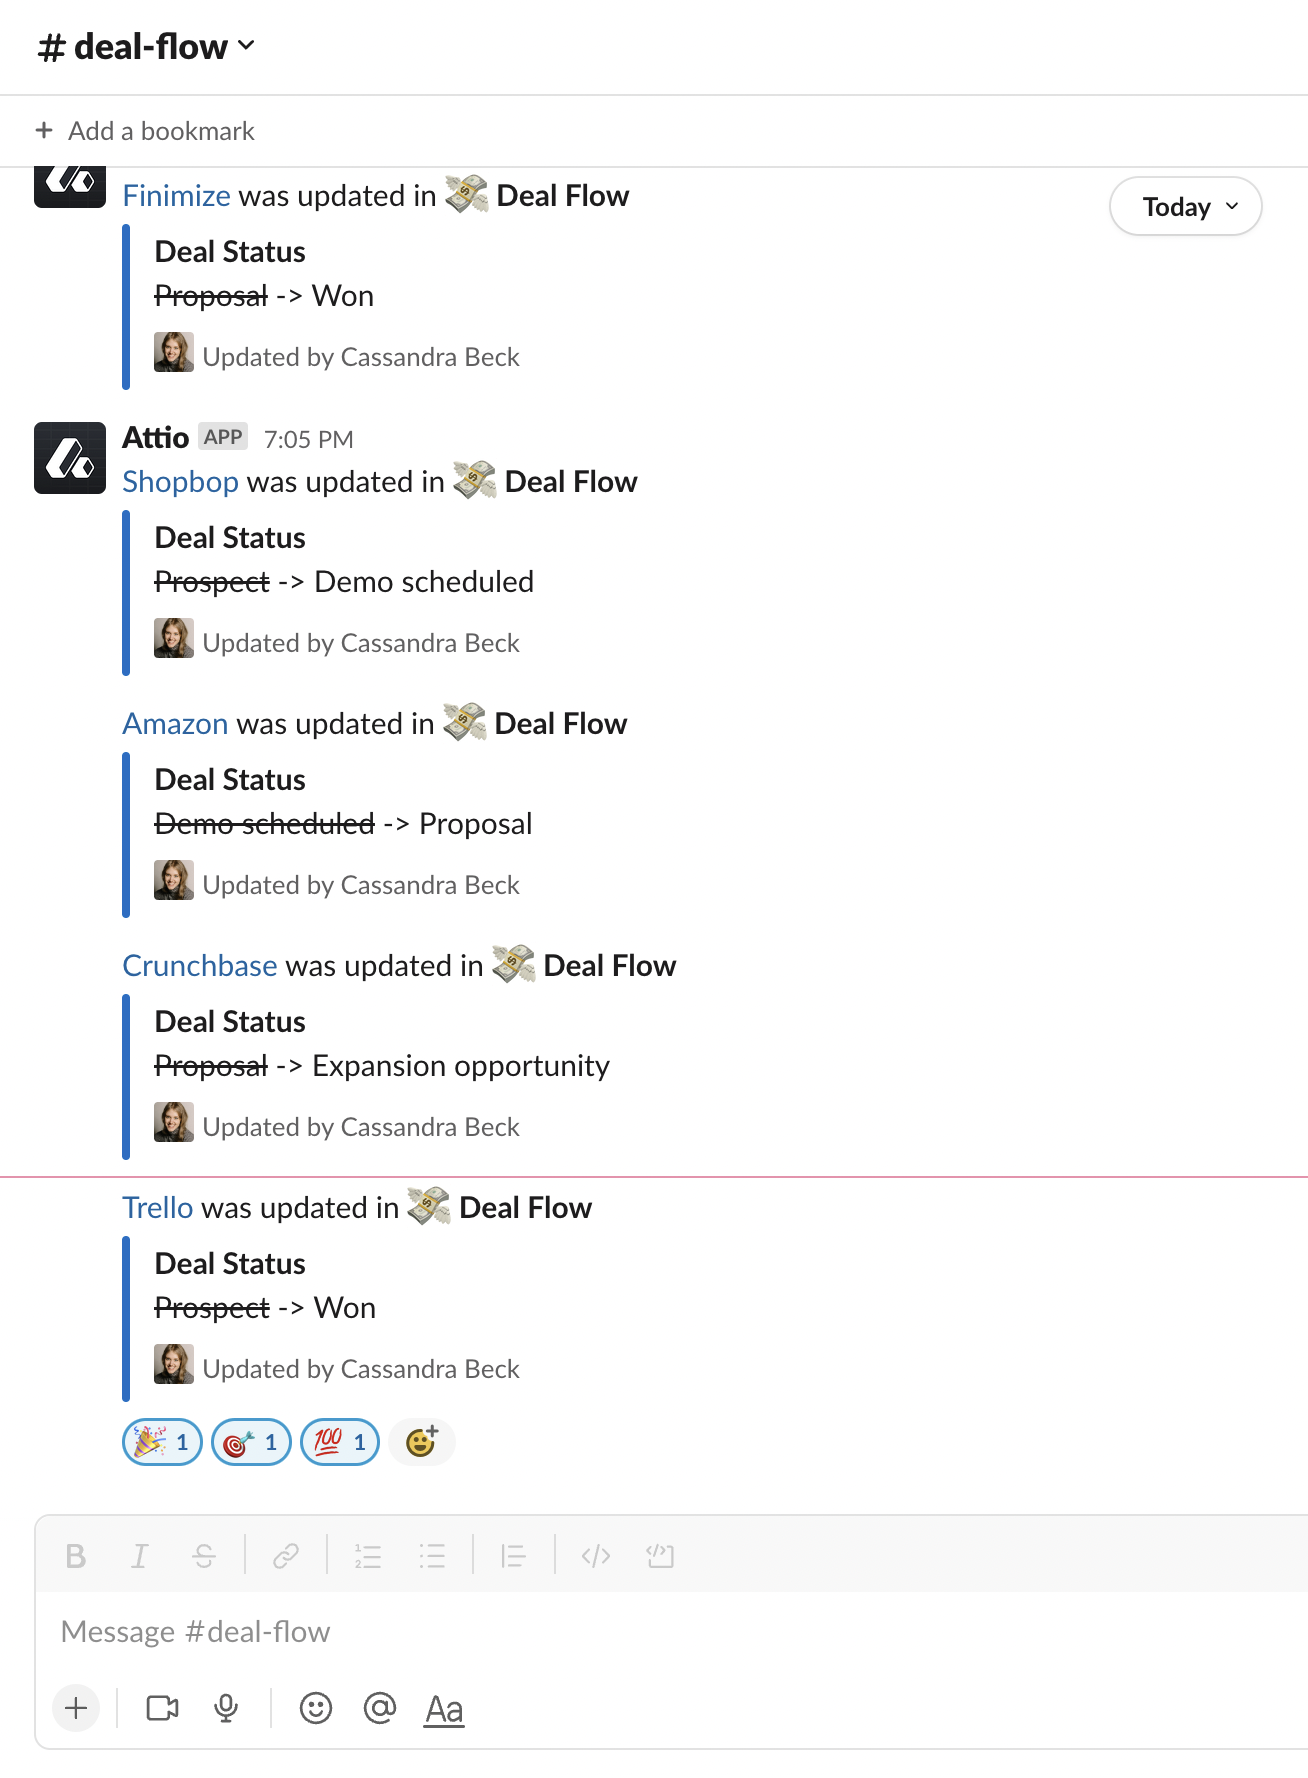 A #deal-flow Slack channel feed showing notifications posted by the Attio bot about attribute updates